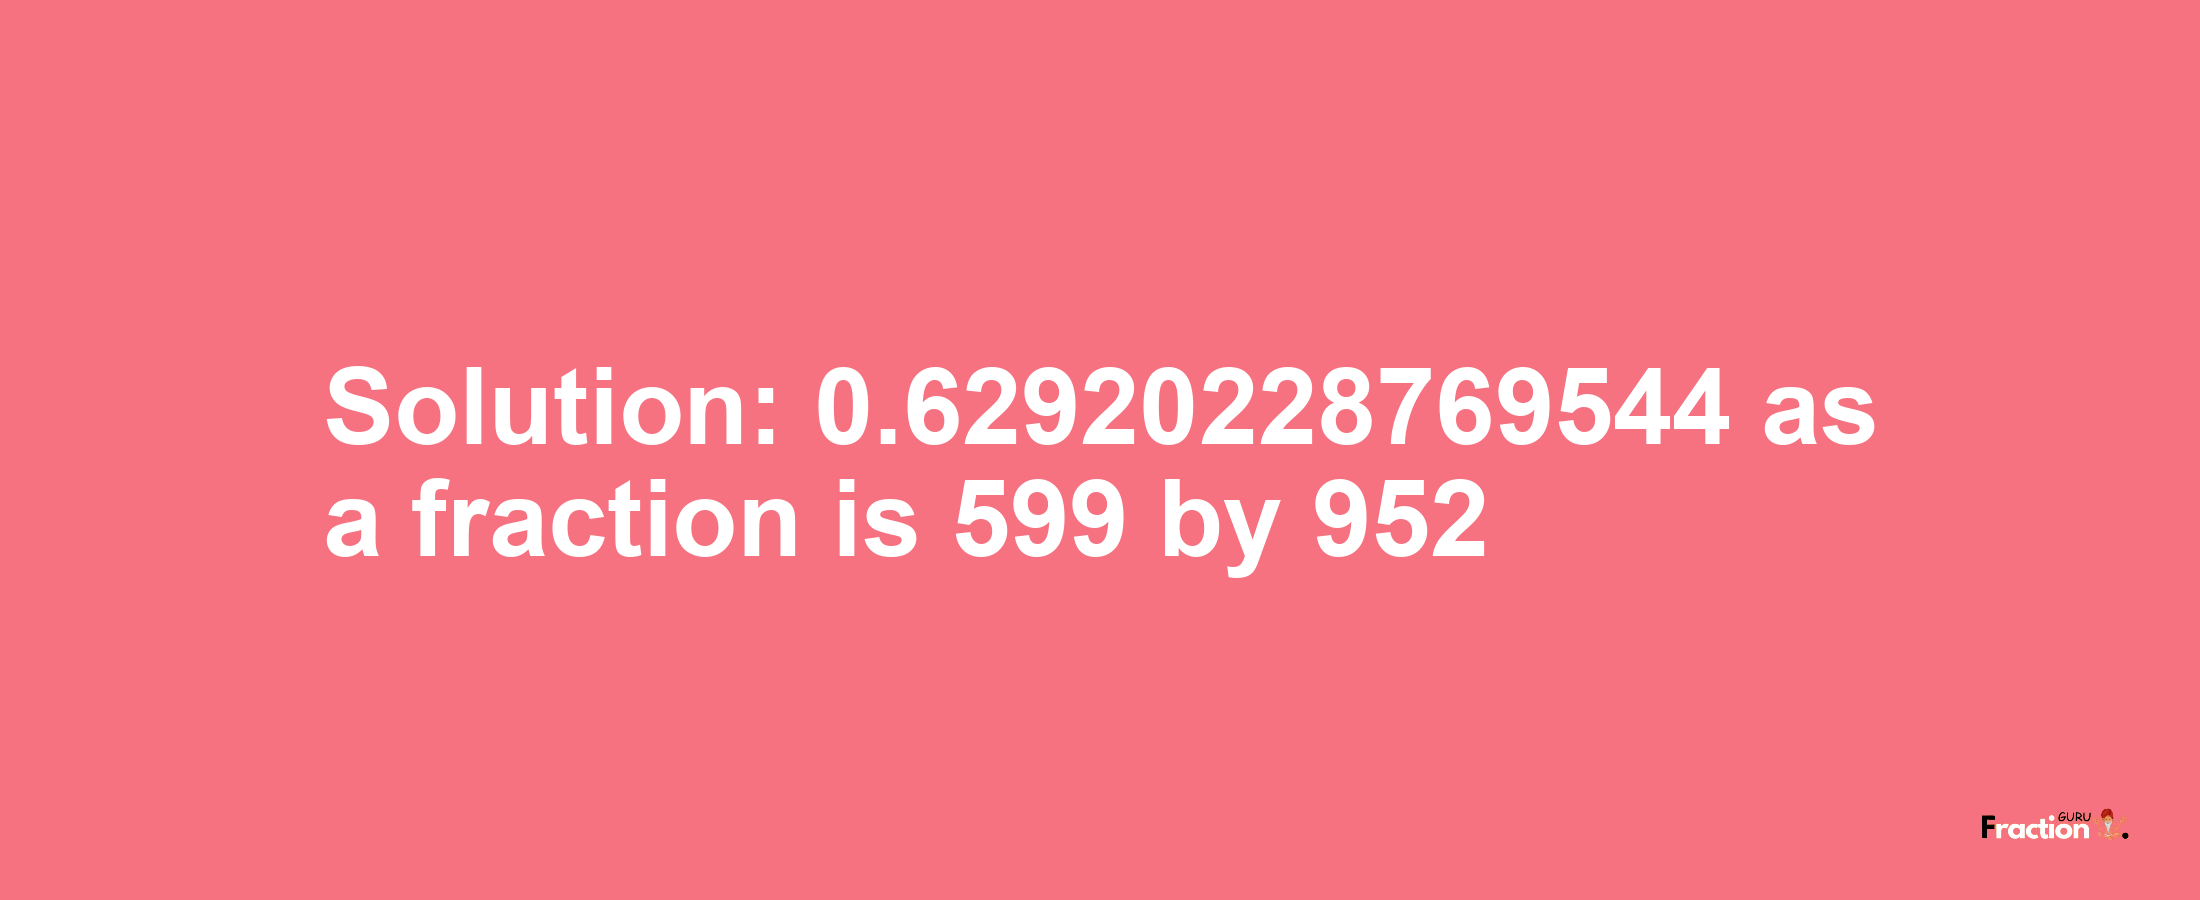 Solution:0.62920228769544 as a fraction is 599/952